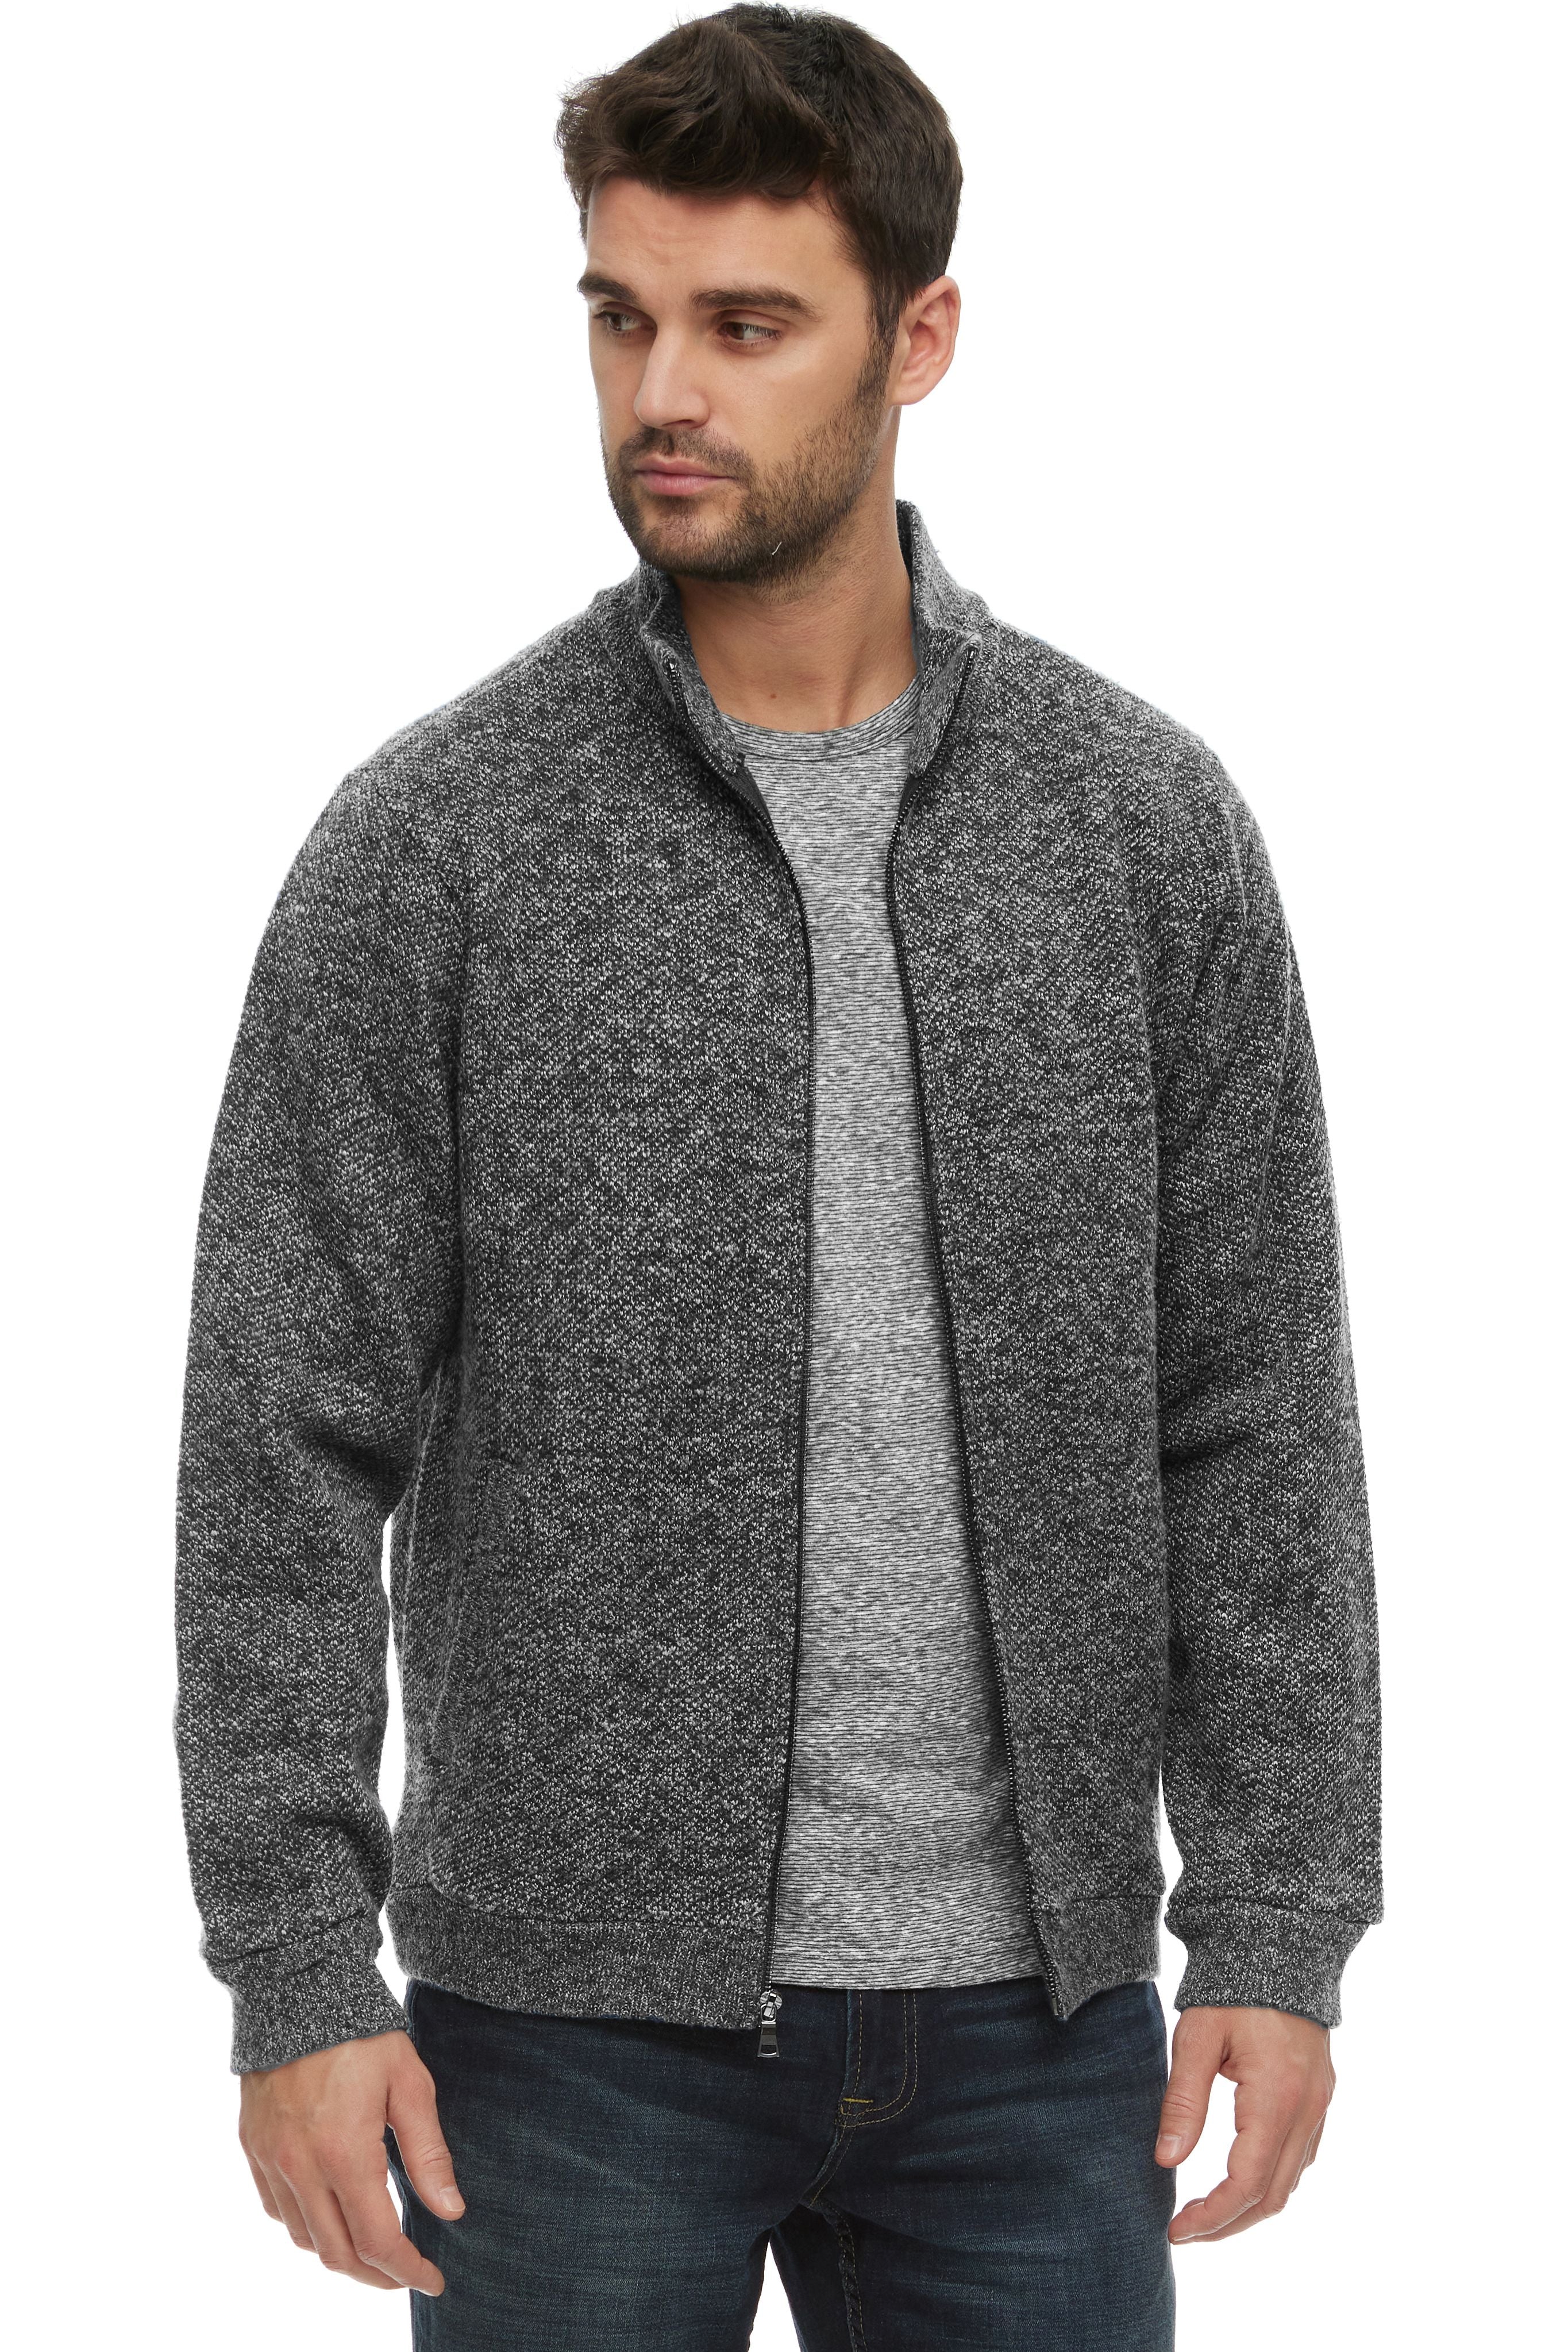 Rhineland Full Zip Mockneck Sweater-Men's Tops-Vixen Collection, Day Spa and Women's Boutique Located in Seattle, Washington